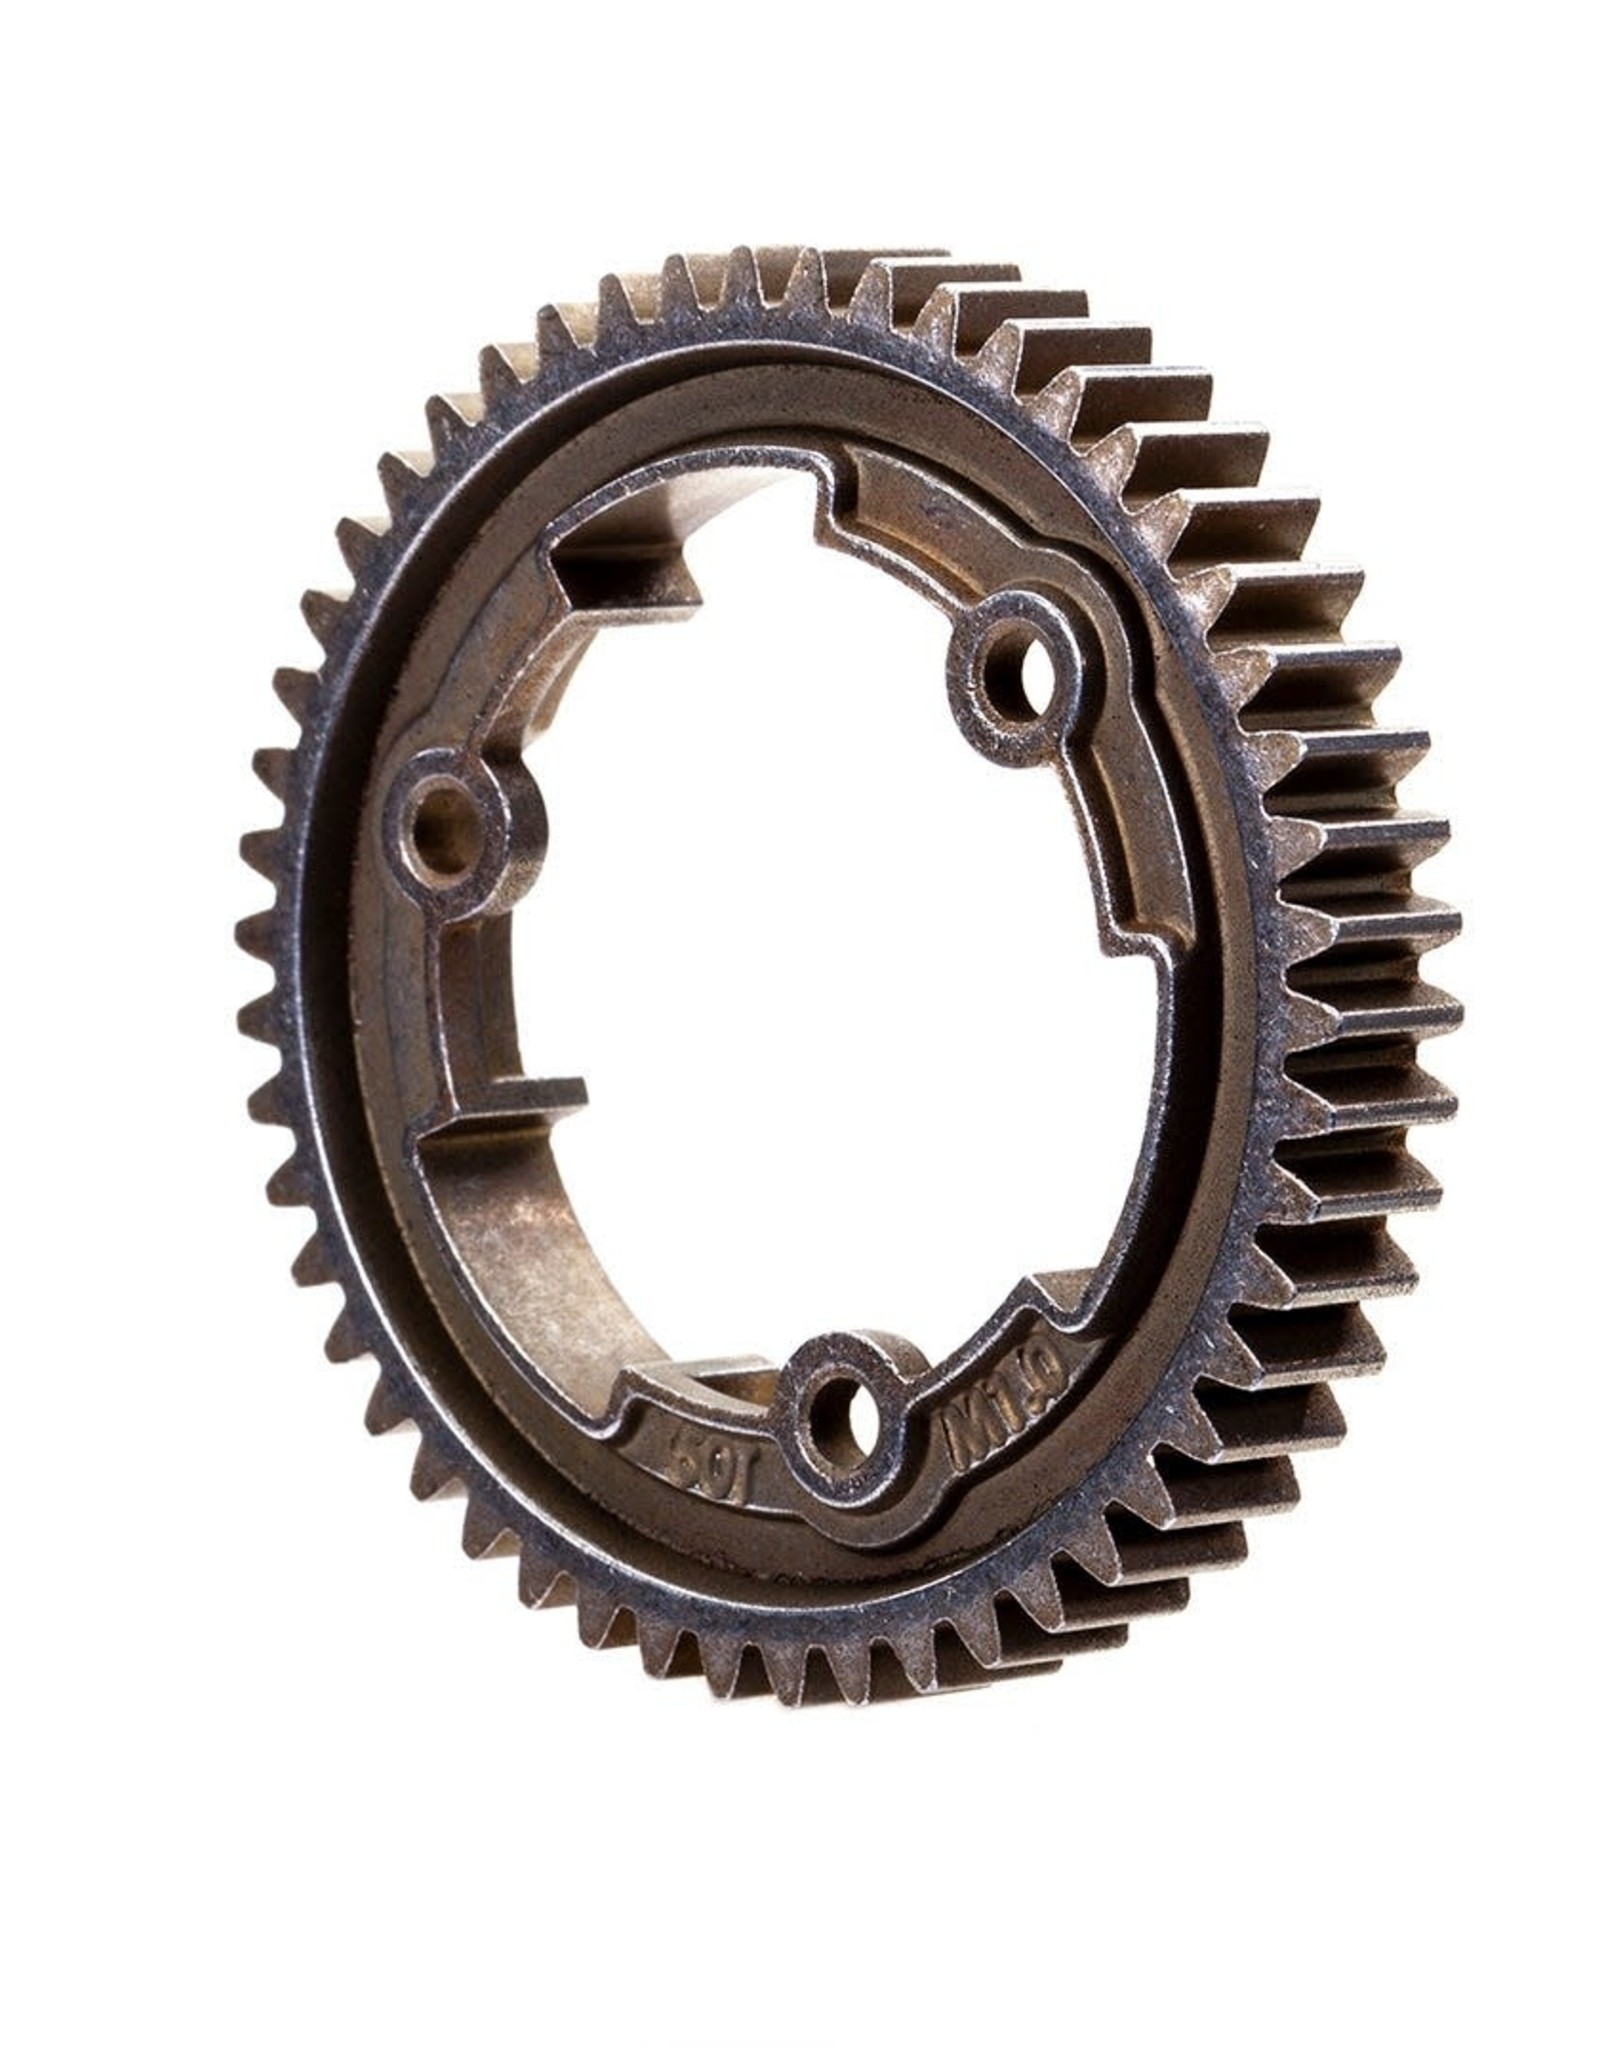 TRAXXAS SPUR GEAR, 50-T, STEEL 1.0 MP Spur gear, 50-tooth, steel (wide-face, 1.0 metric pitch)